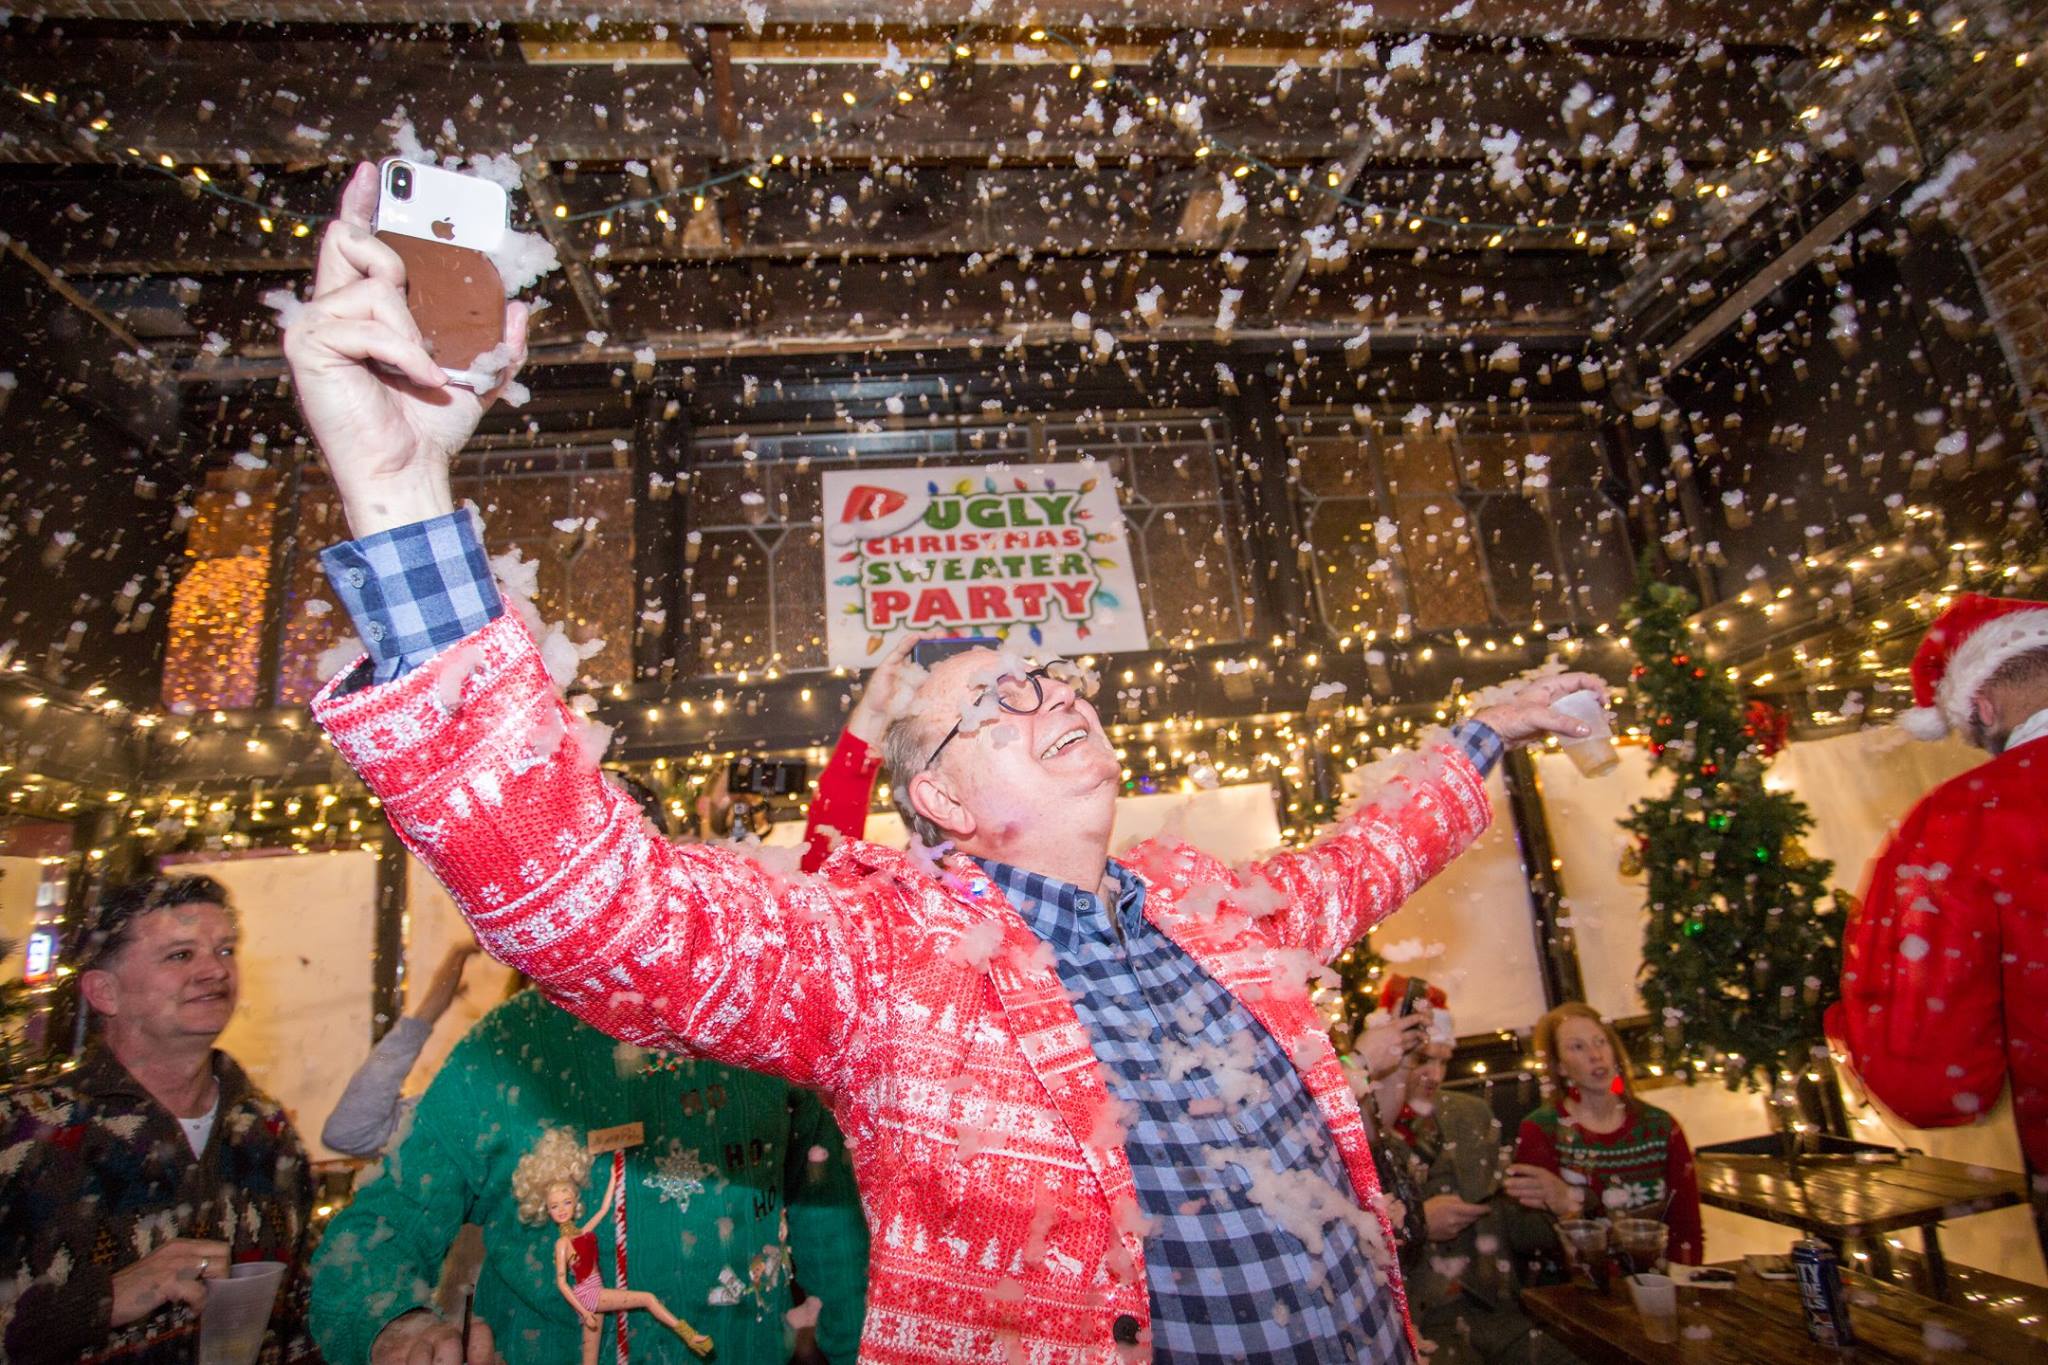 An indoor snowstorm at The Ugly Christmas Sweater Party